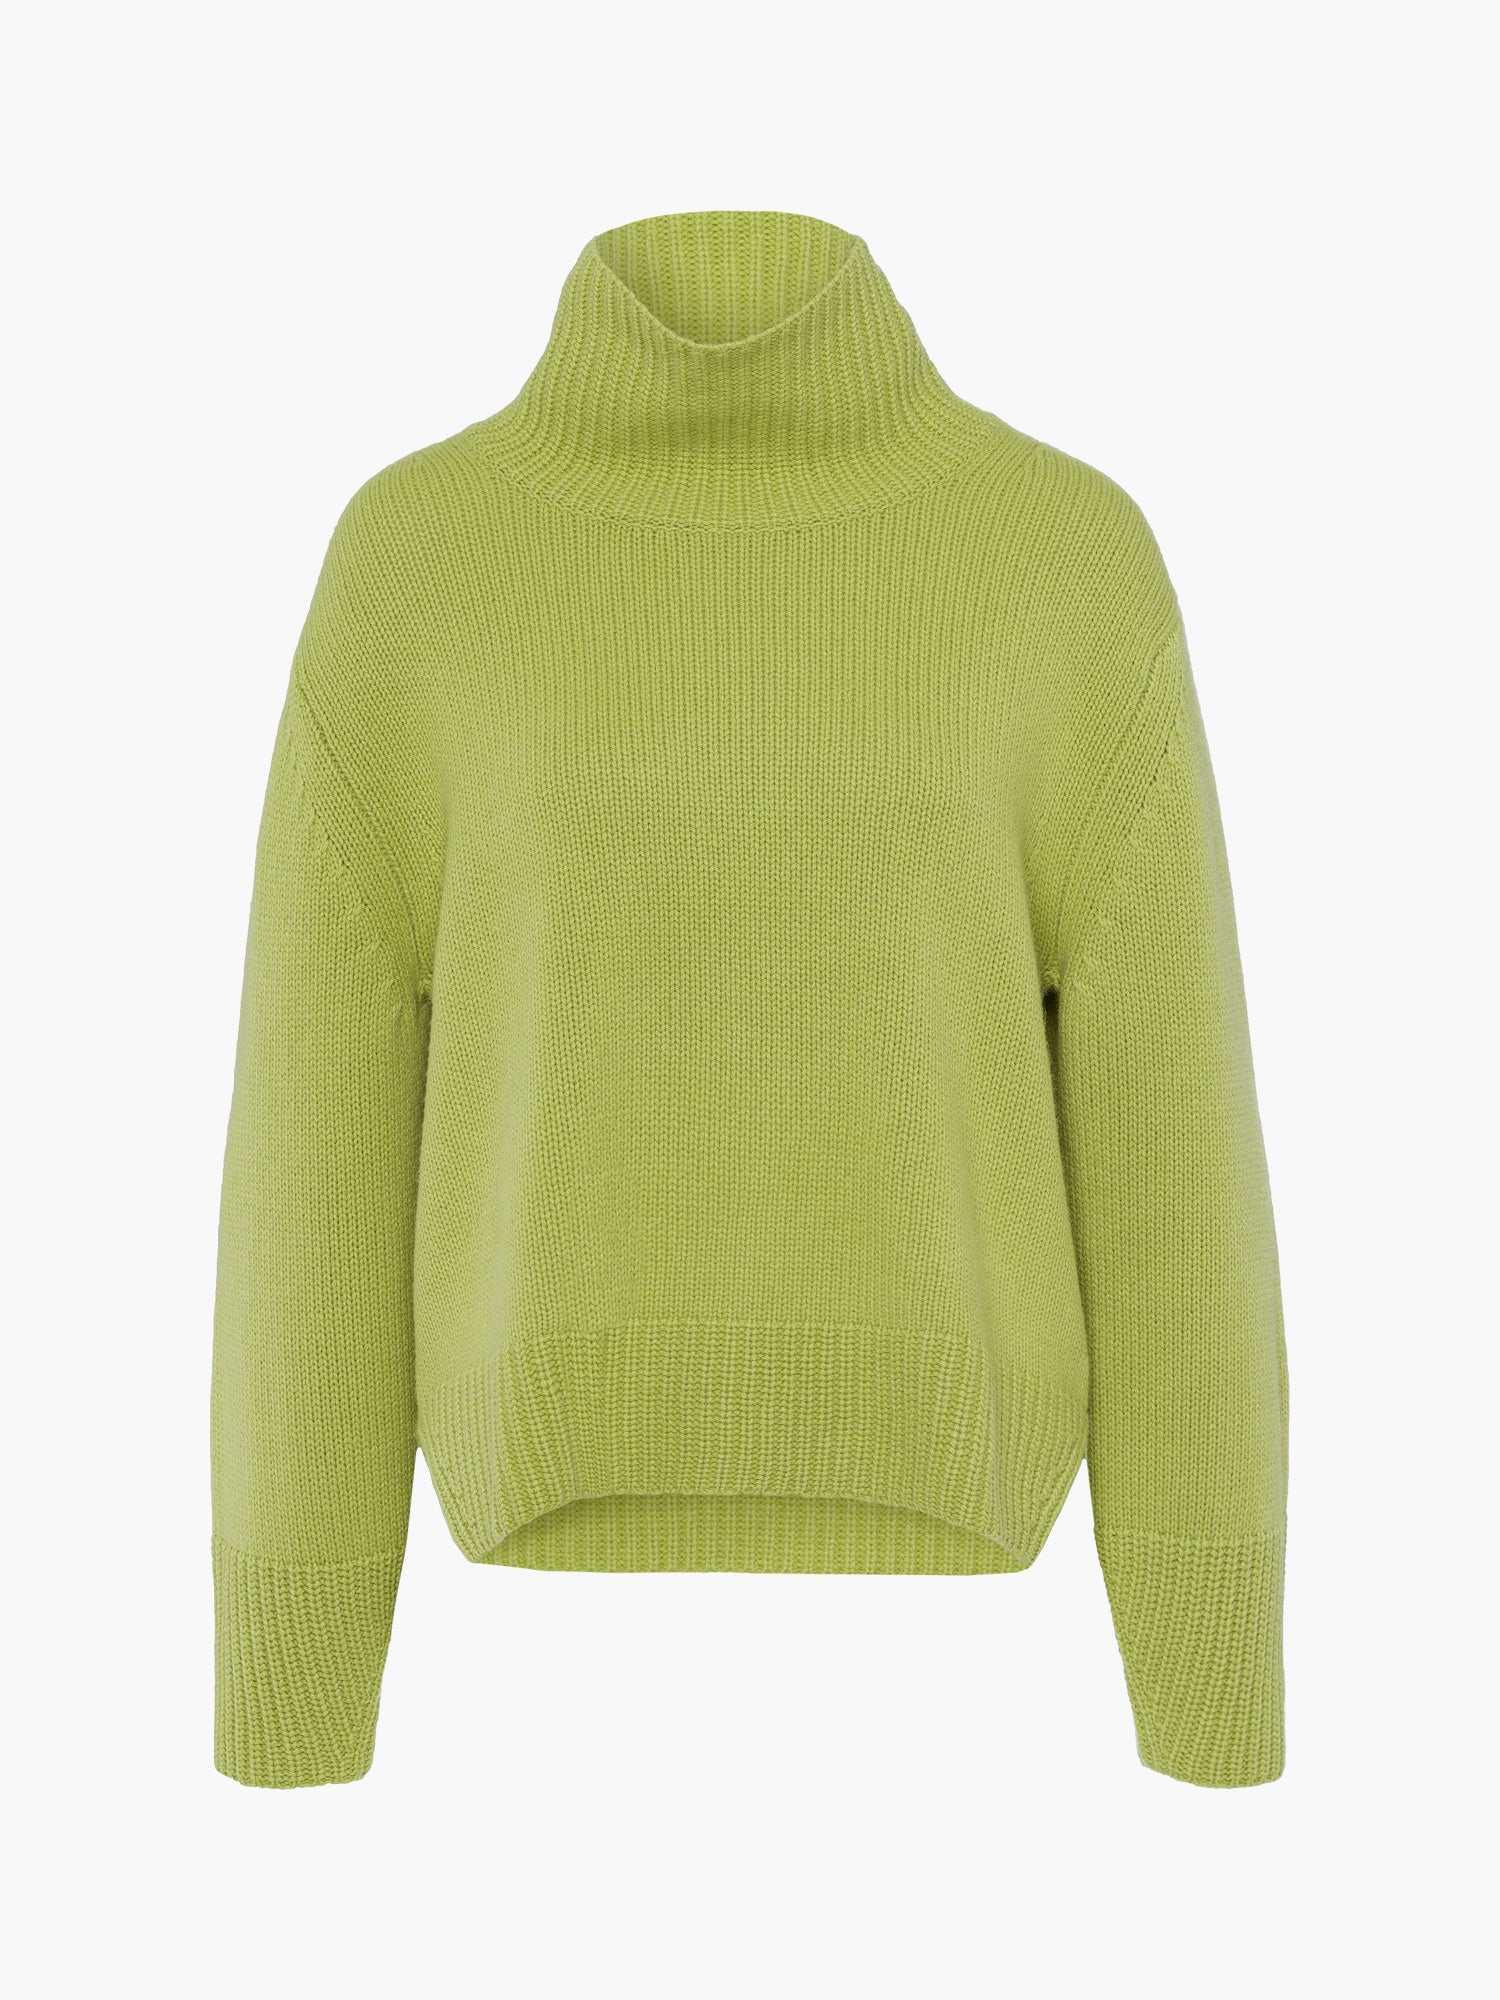 FTC-Cashmere-OUTLET-SALE-Pullover-Highneck-Strick-ARCHIVE-COLLECTION_528e5ce8-8703-4aa4-8a90-831b63030600.jpg